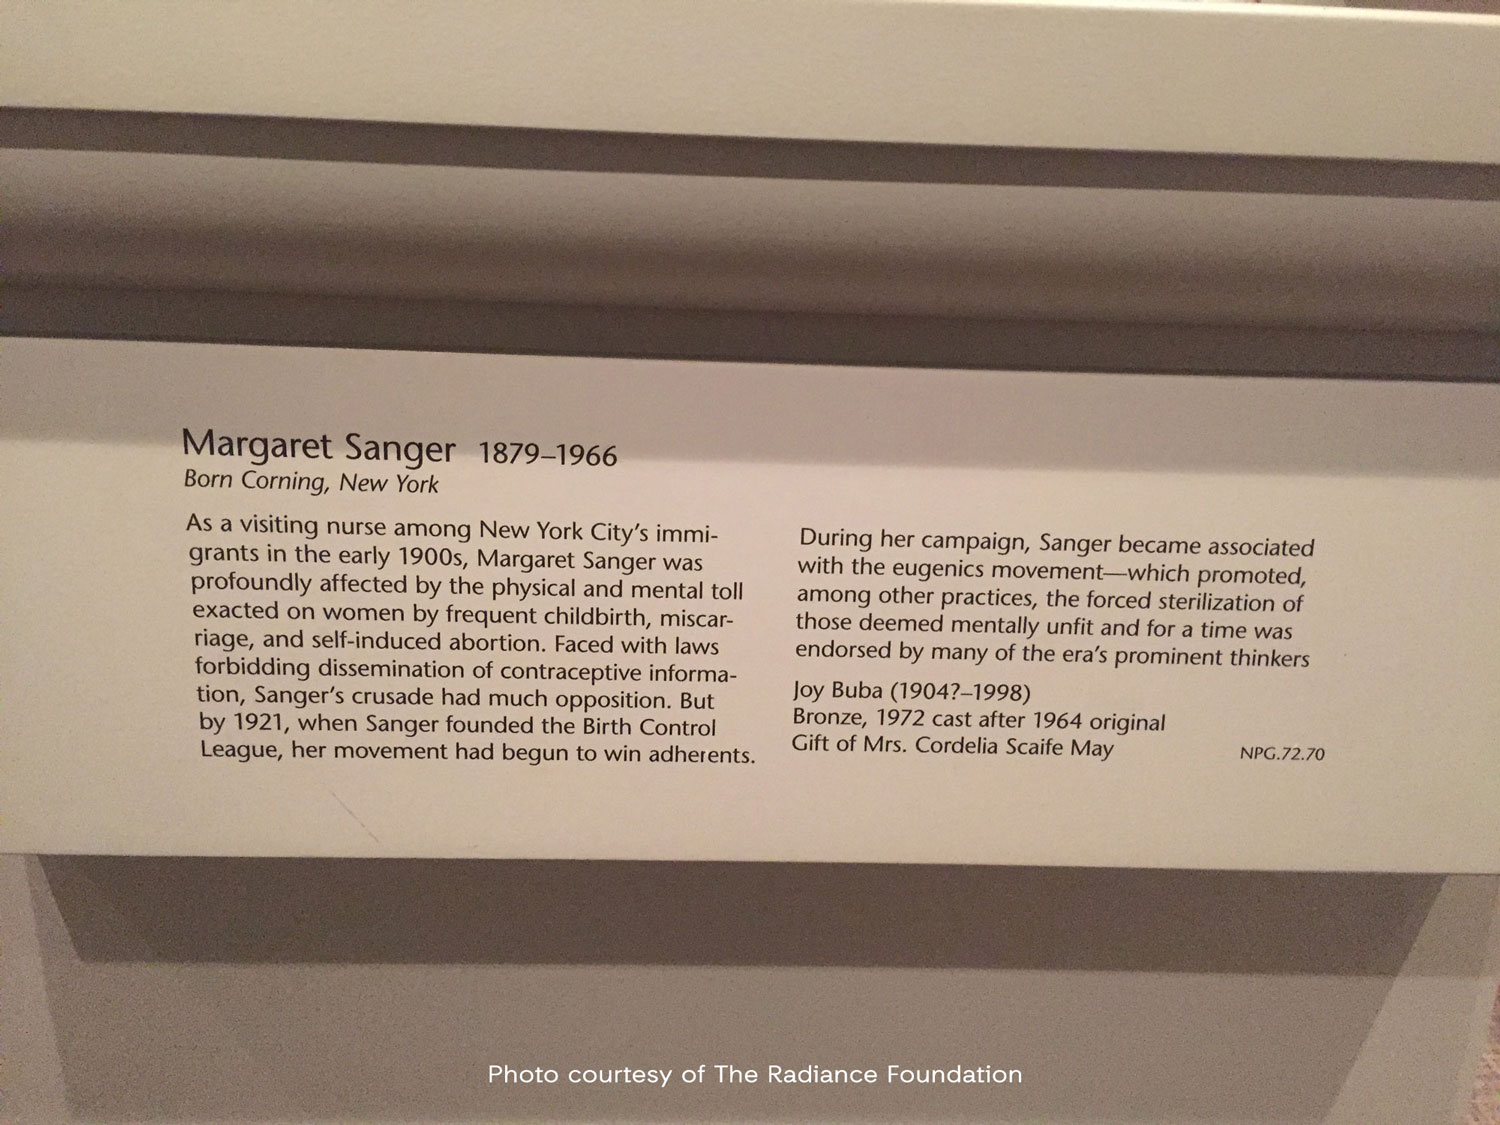 Bust of Margaret Sanger in Smithsonian National Portrait Gallery's "Struggle for Justice" exhibit